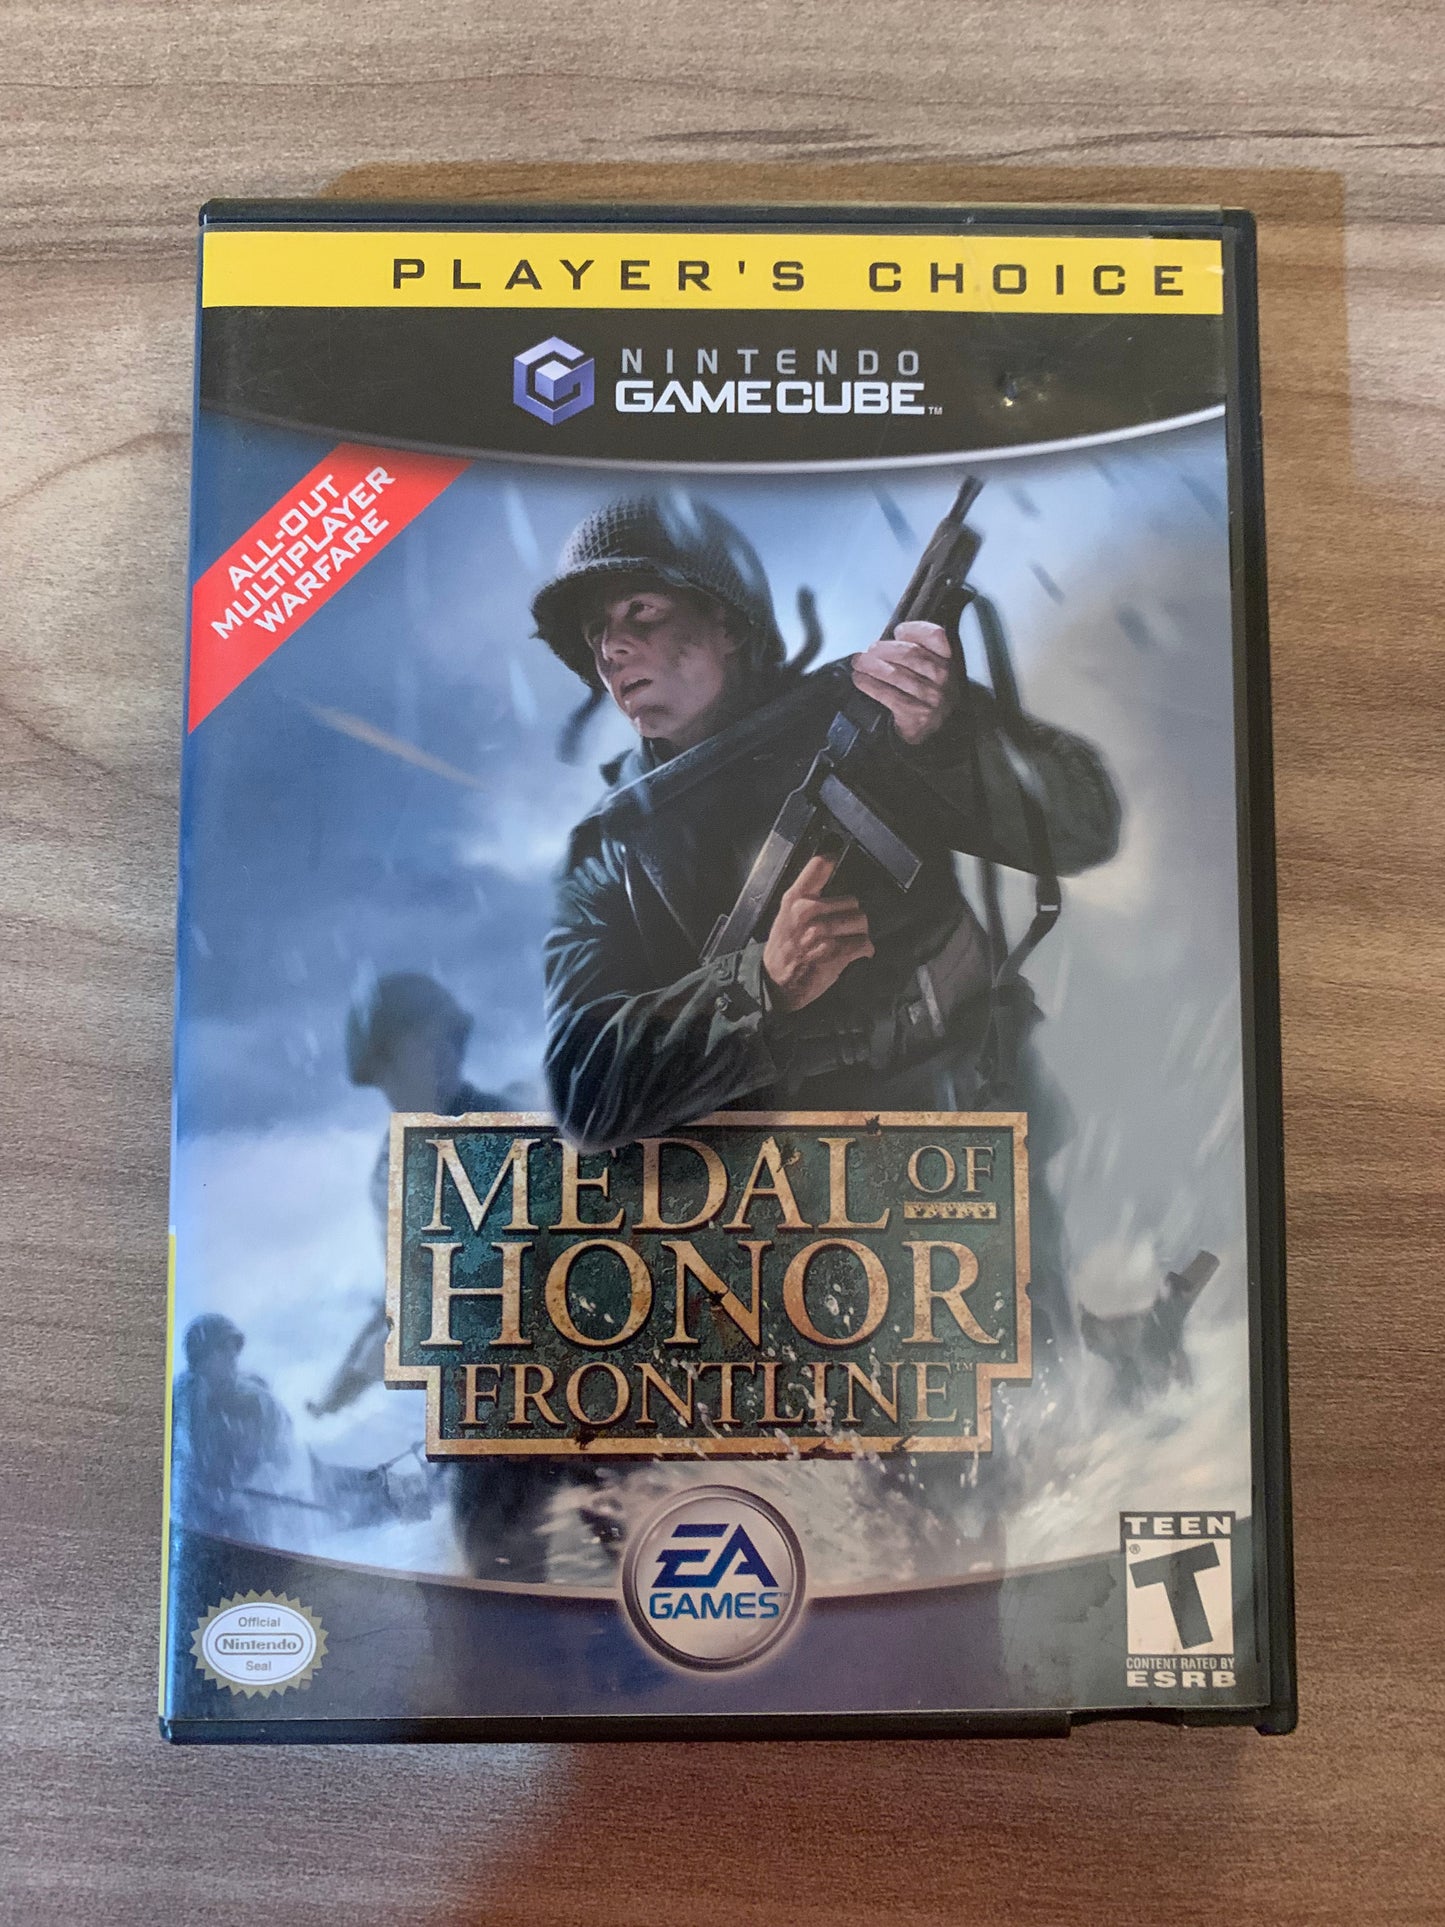 NiNTENDO GAMECUBE [NGC] | MEDAL OF HONOR FRONTLiNE | PLAYERS CHOiCE